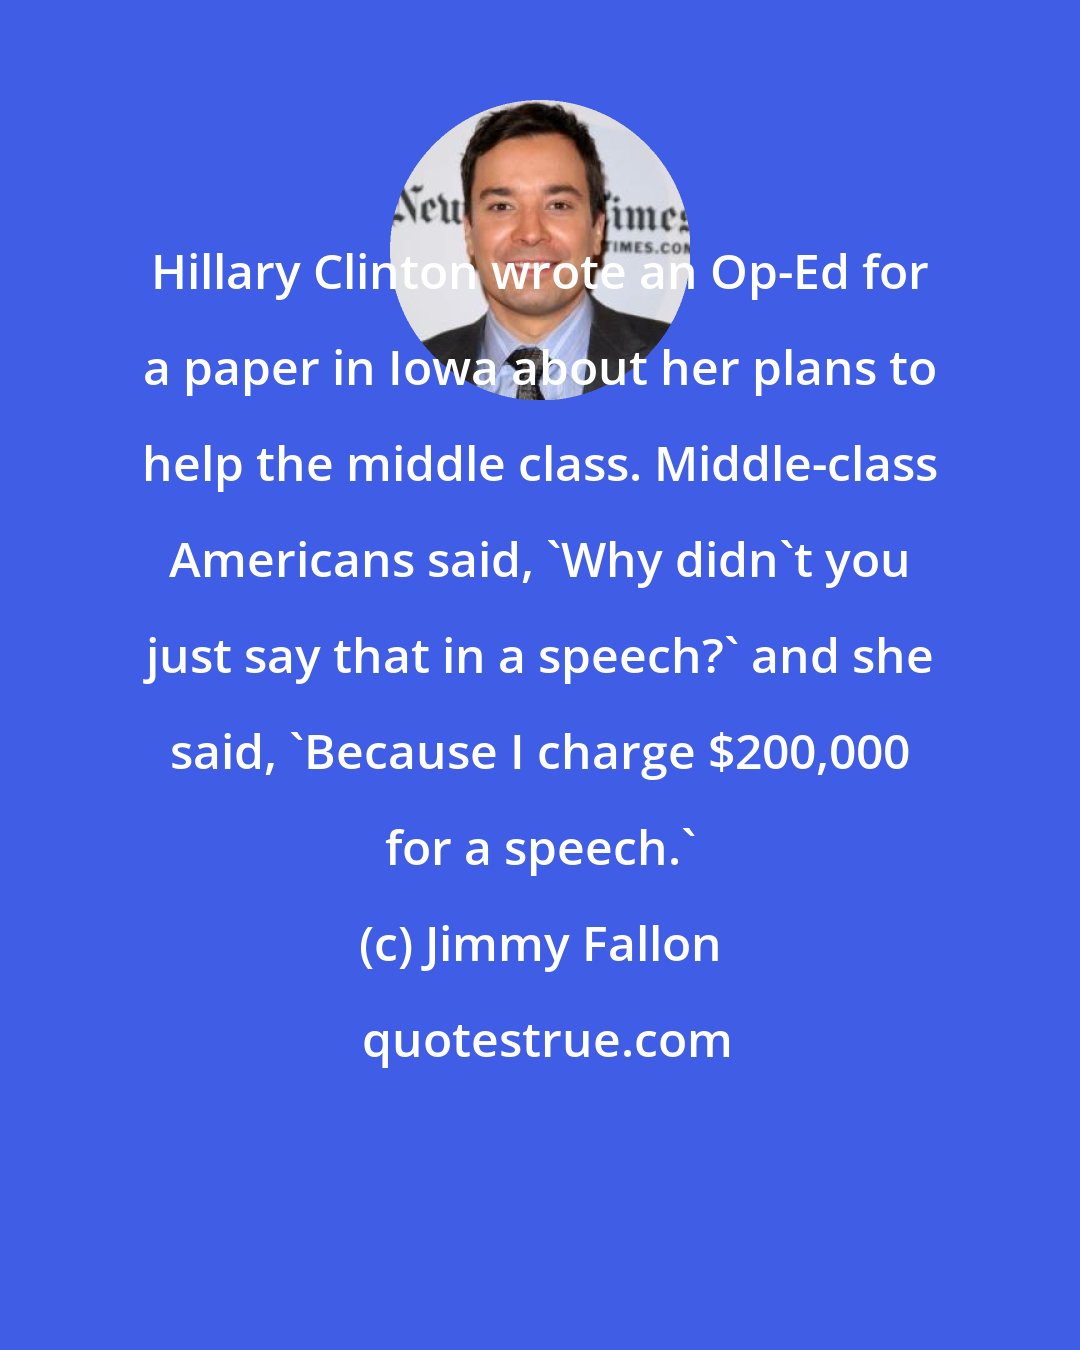 Jimmy Fallon: Hillary Clinton wrote an Op-Ed for a paper in Iowa about her plans to help the middle class. Middle-class Americans said, 'Why didn't you just say that in a speech?' and she said, 'Because I charge $200,000 for a speech.'